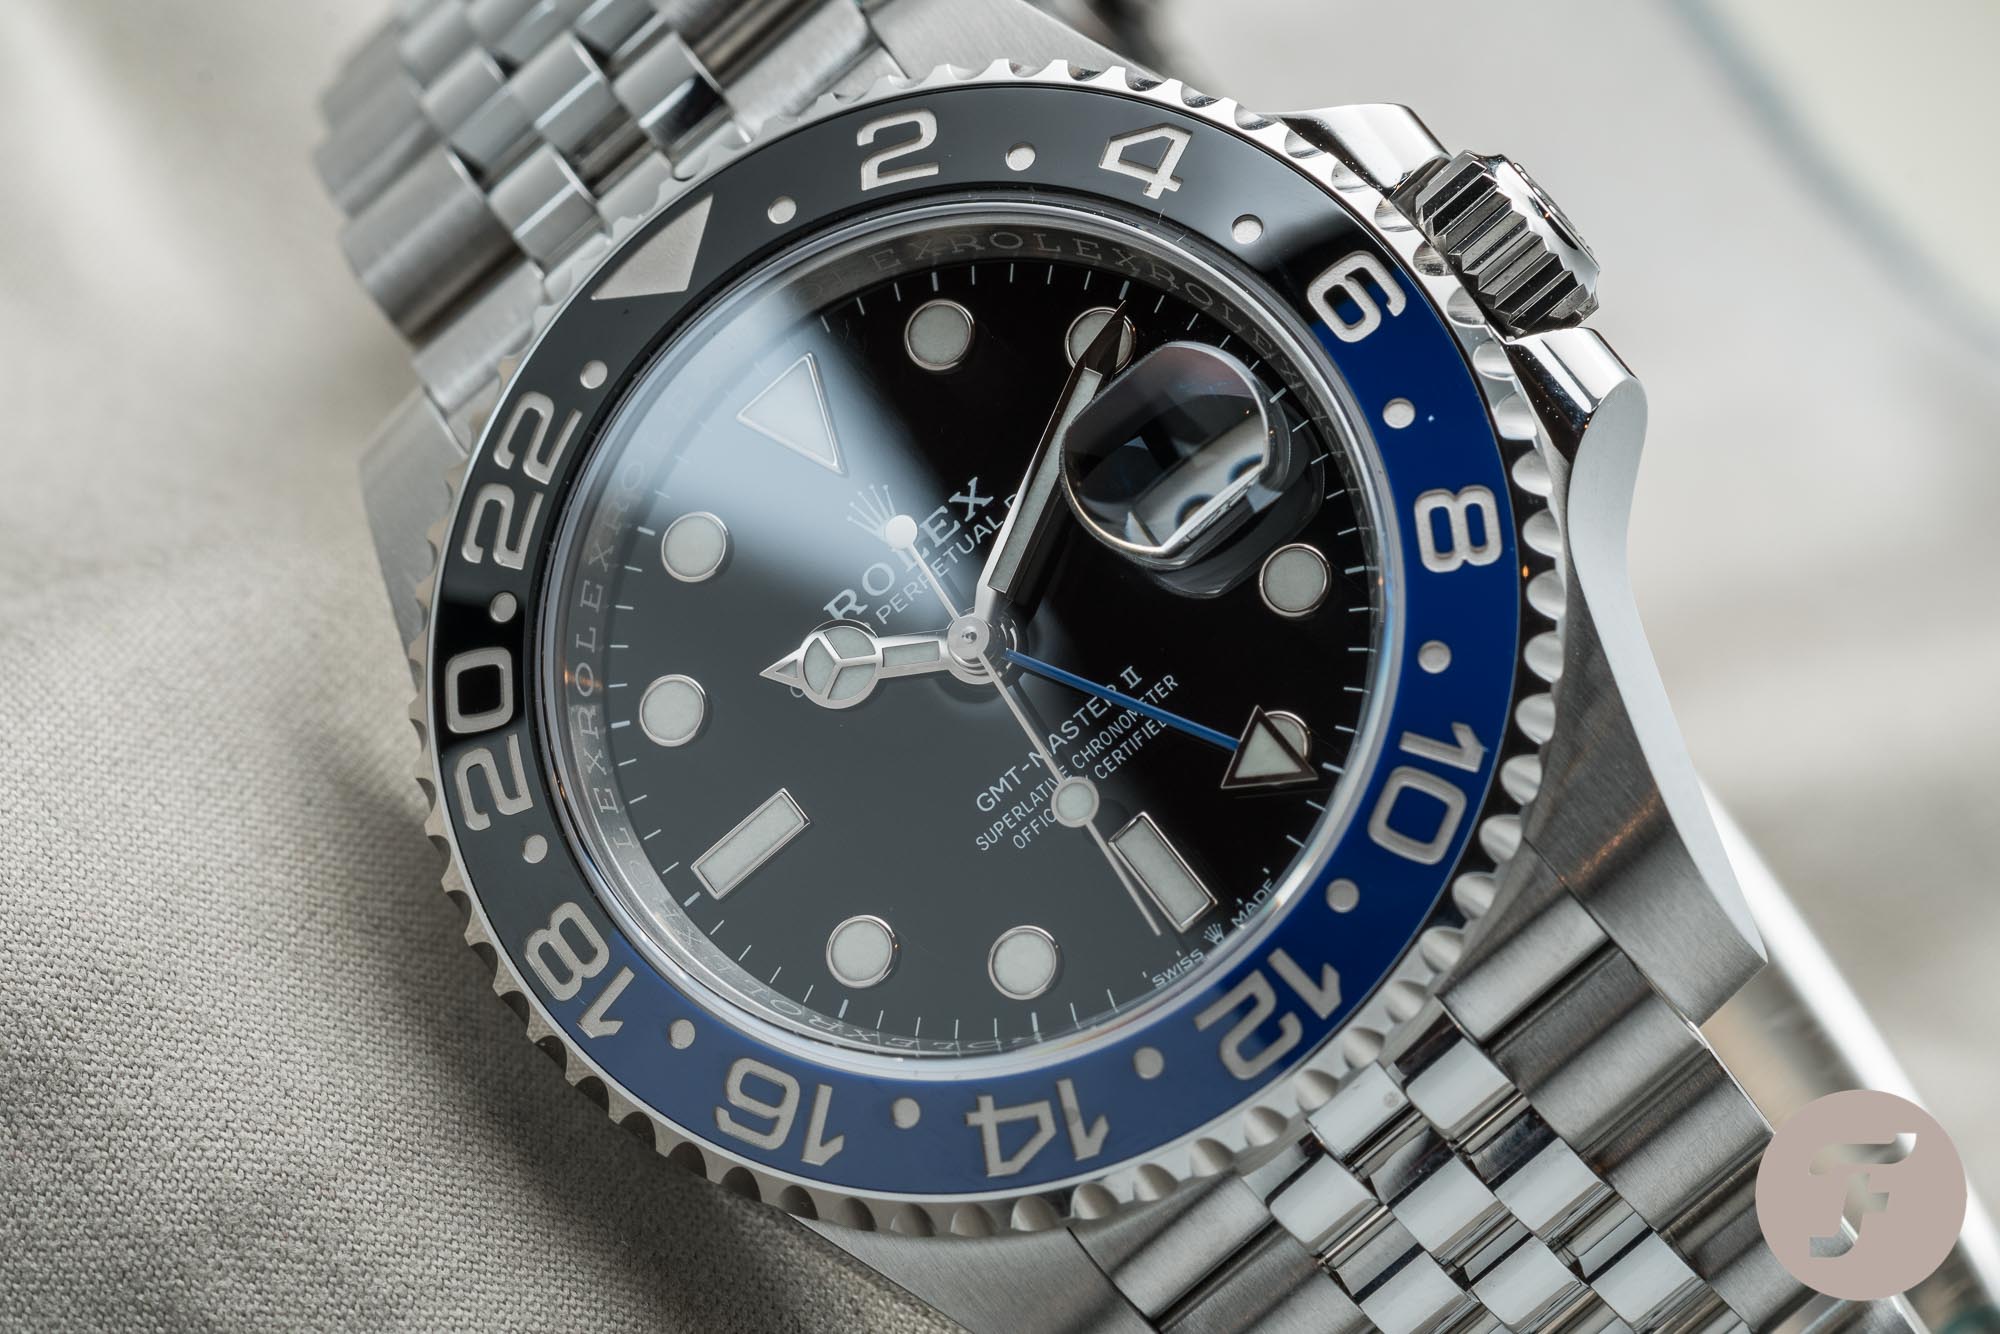 Top 10 Rolex Watches Overview of Models Favoured By Our Readers